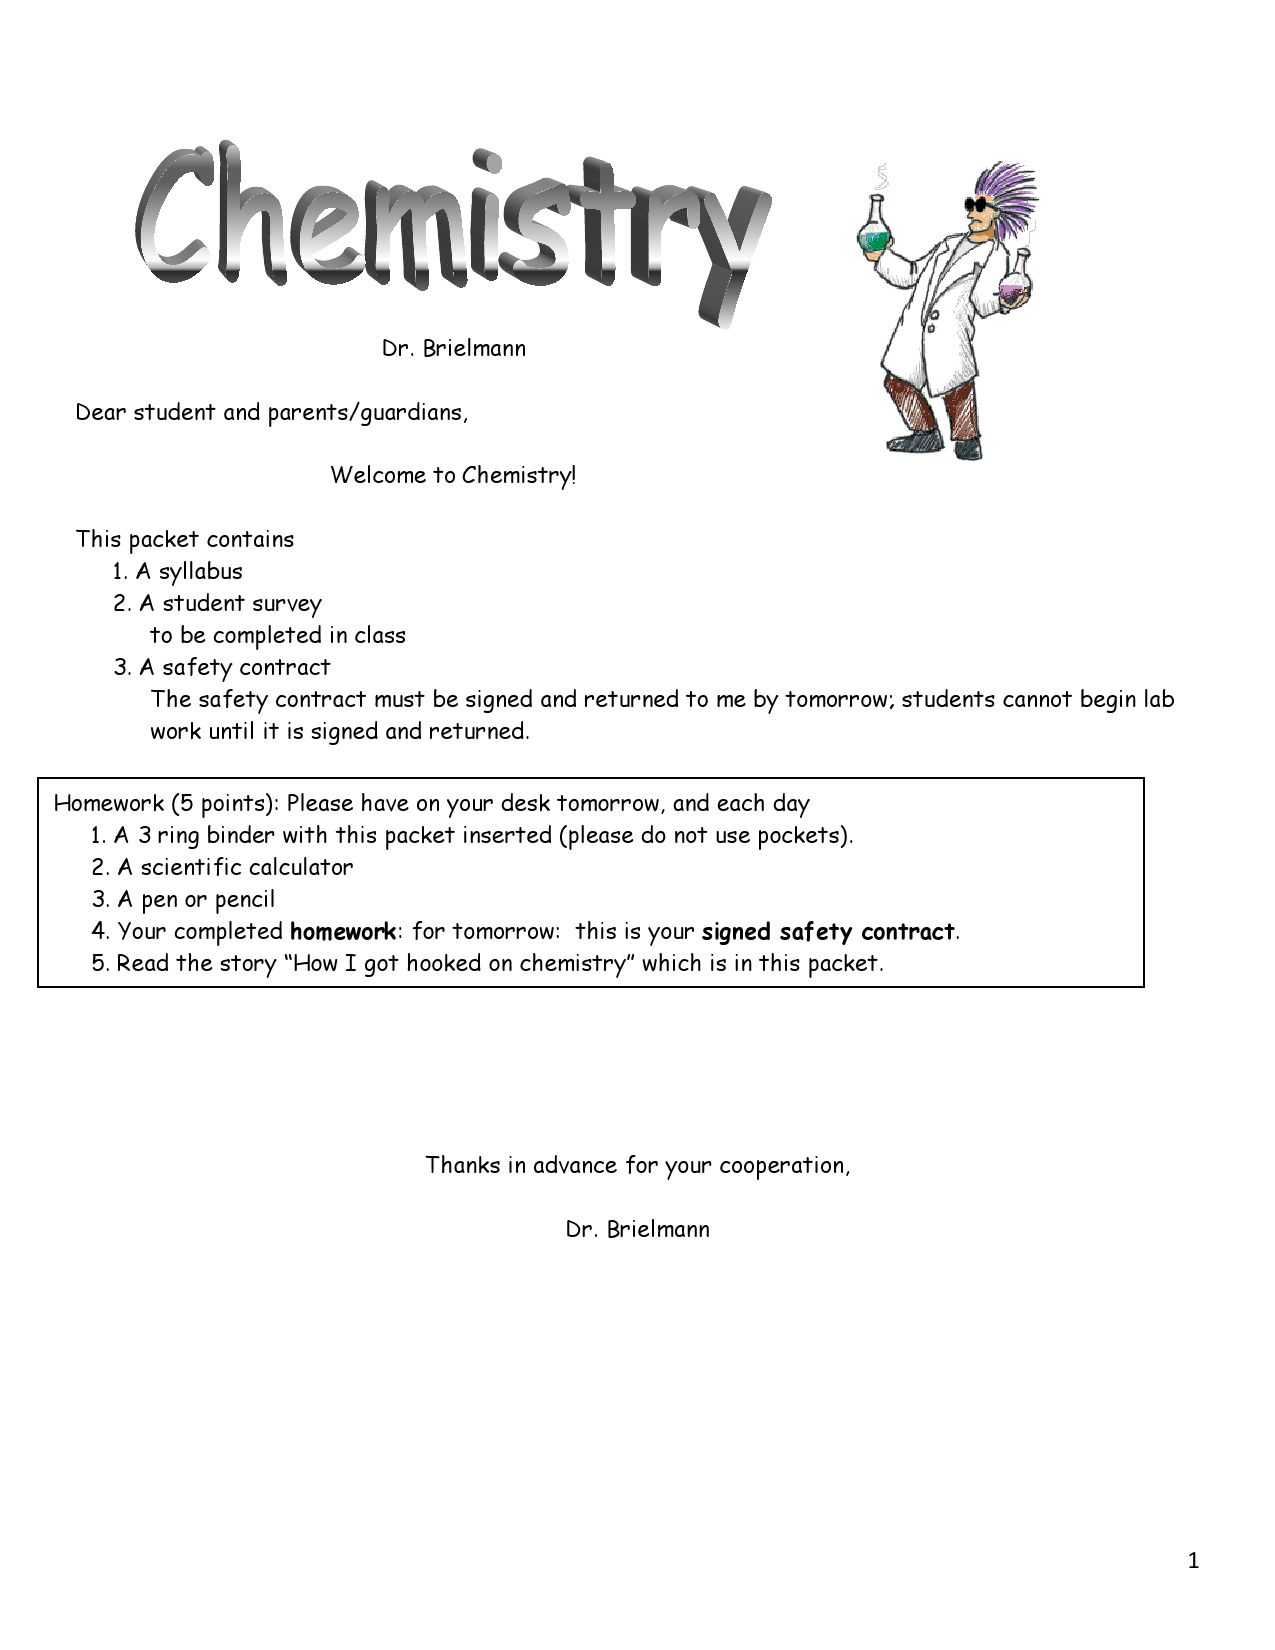 Abundance Of isotopes Chem Worksheet 4 3 together with R Chemistryadventure the Textbook by Chemistryadventure issuu